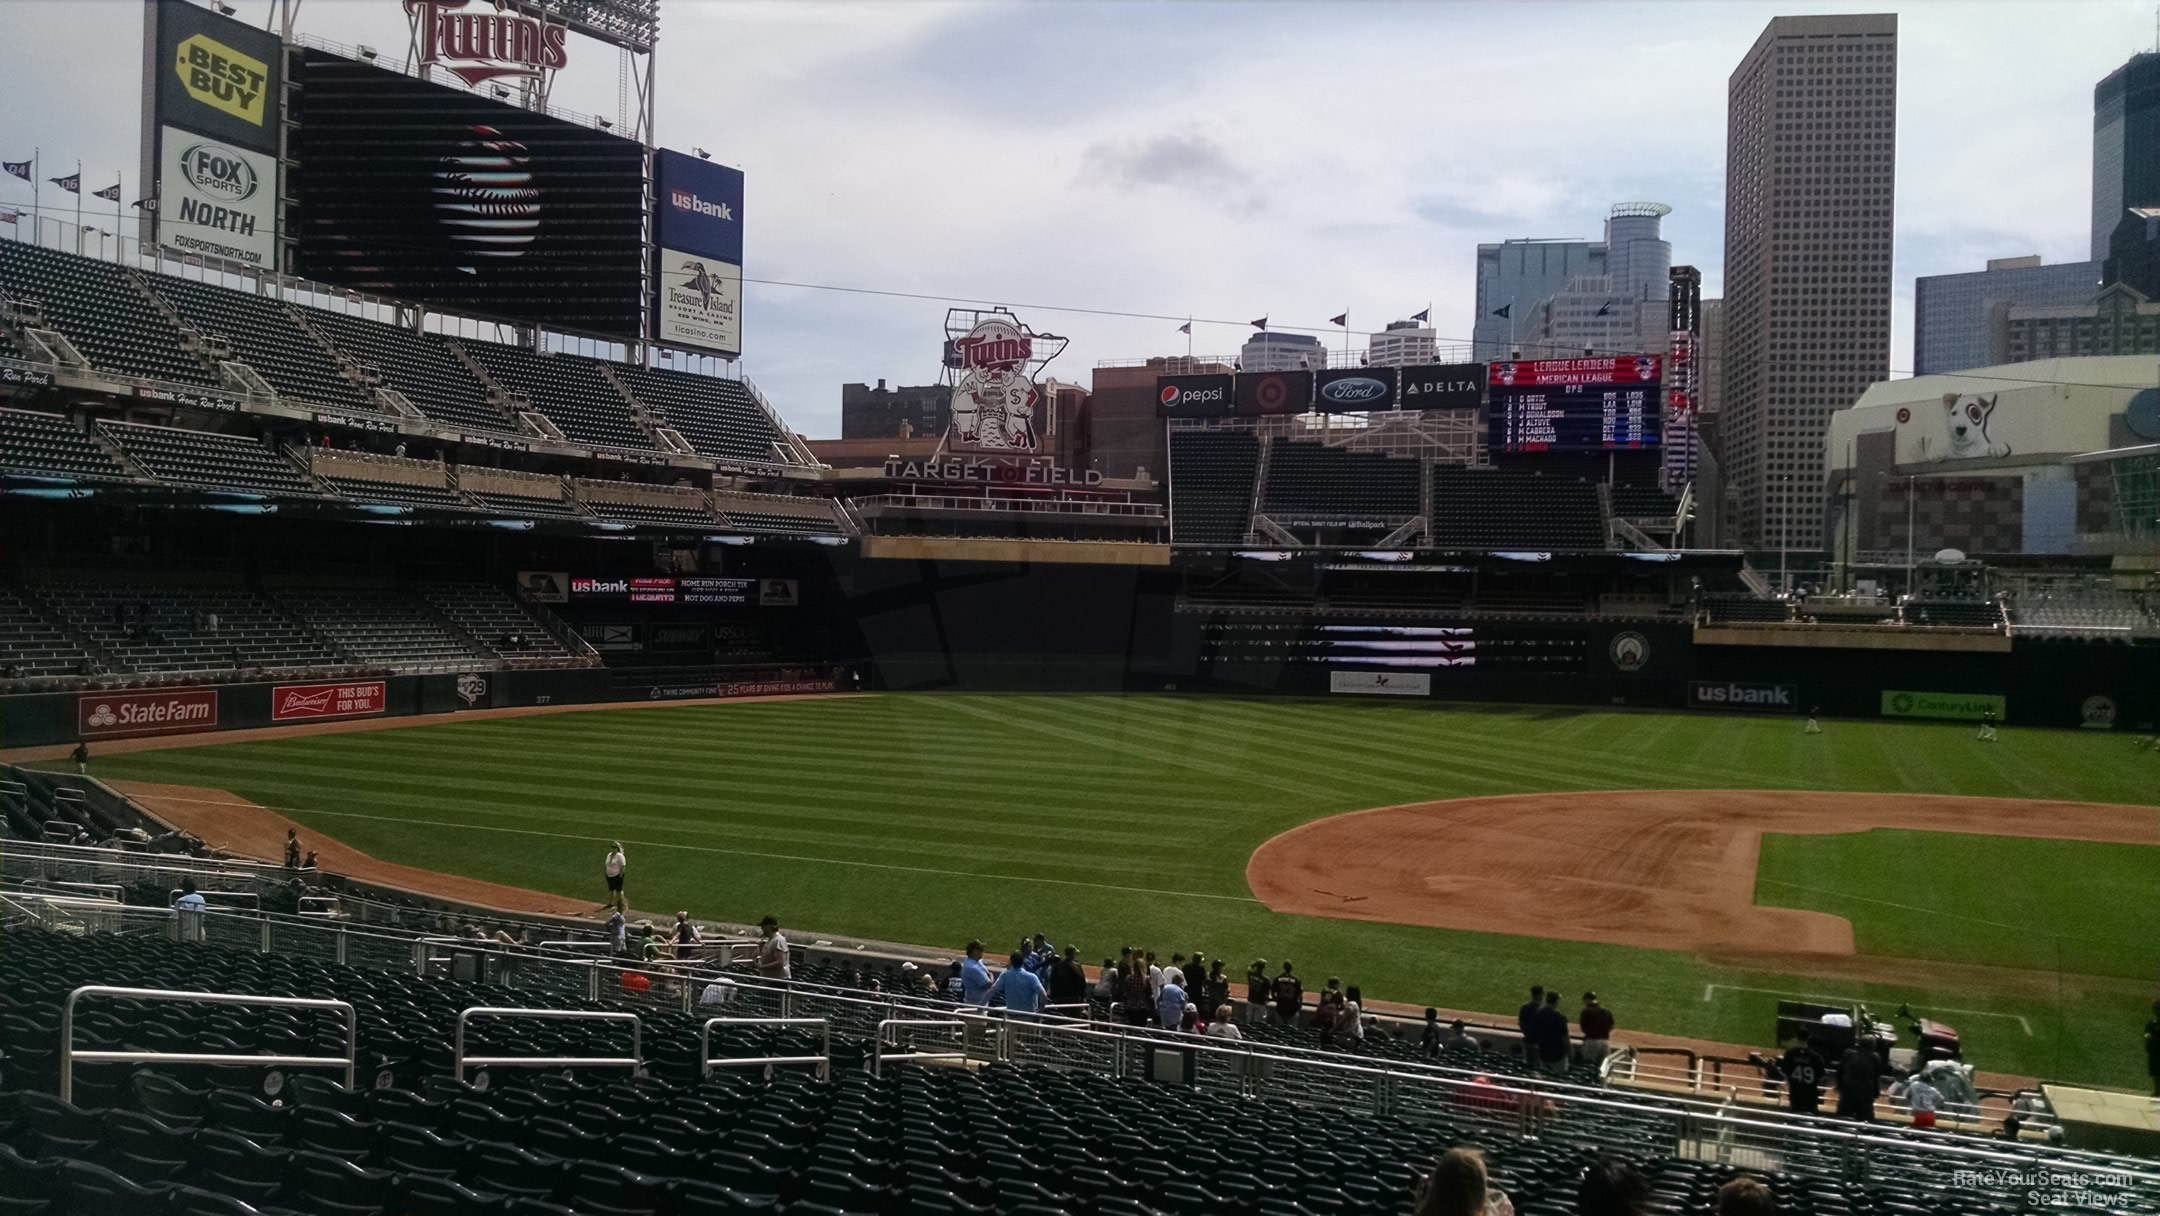 Section 122 at Target Field 